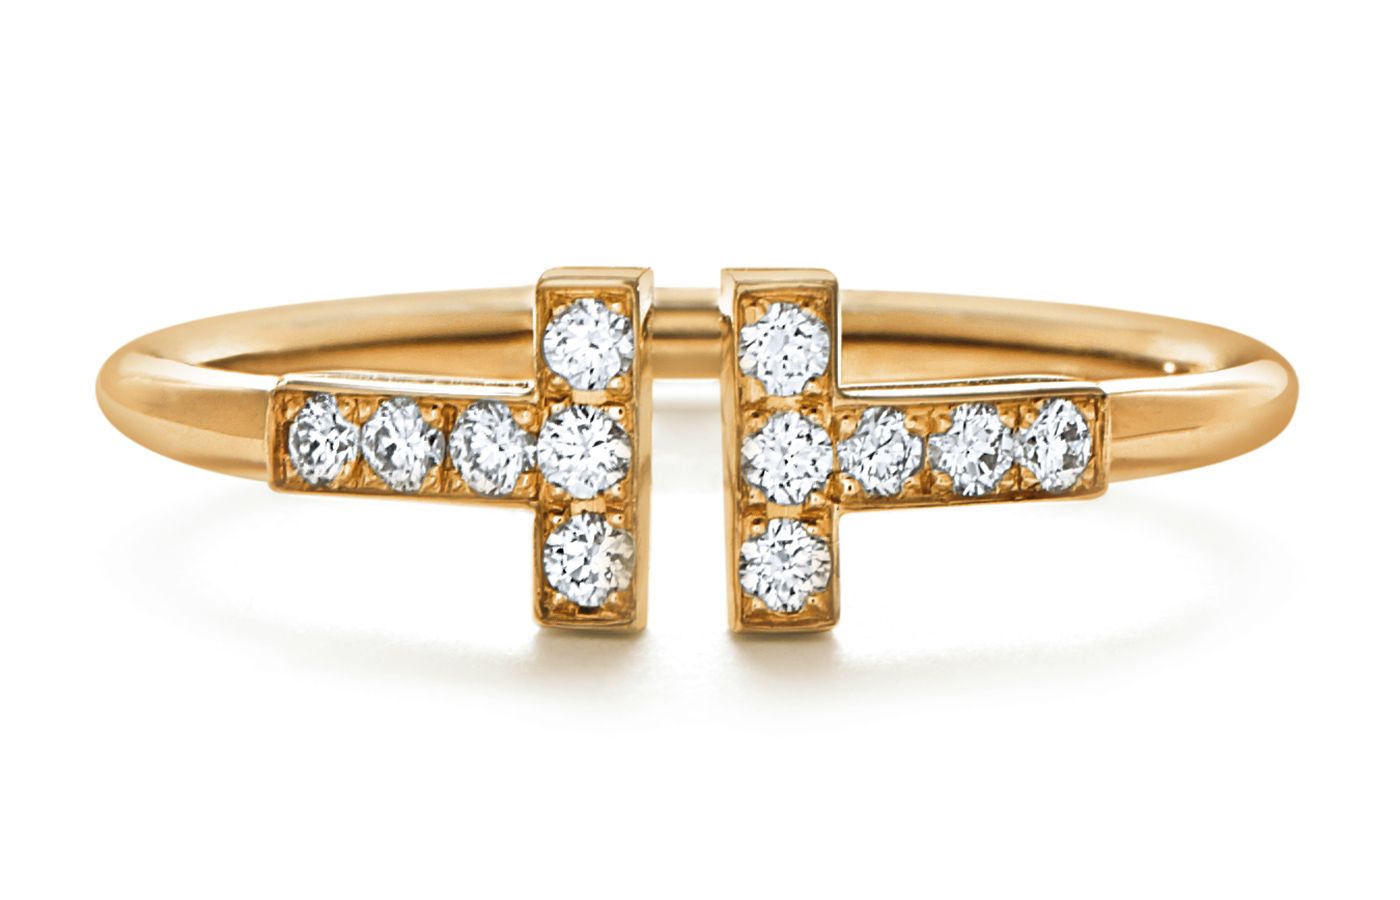 Tiffany & Co. Tiffany T ring in gold and diamond